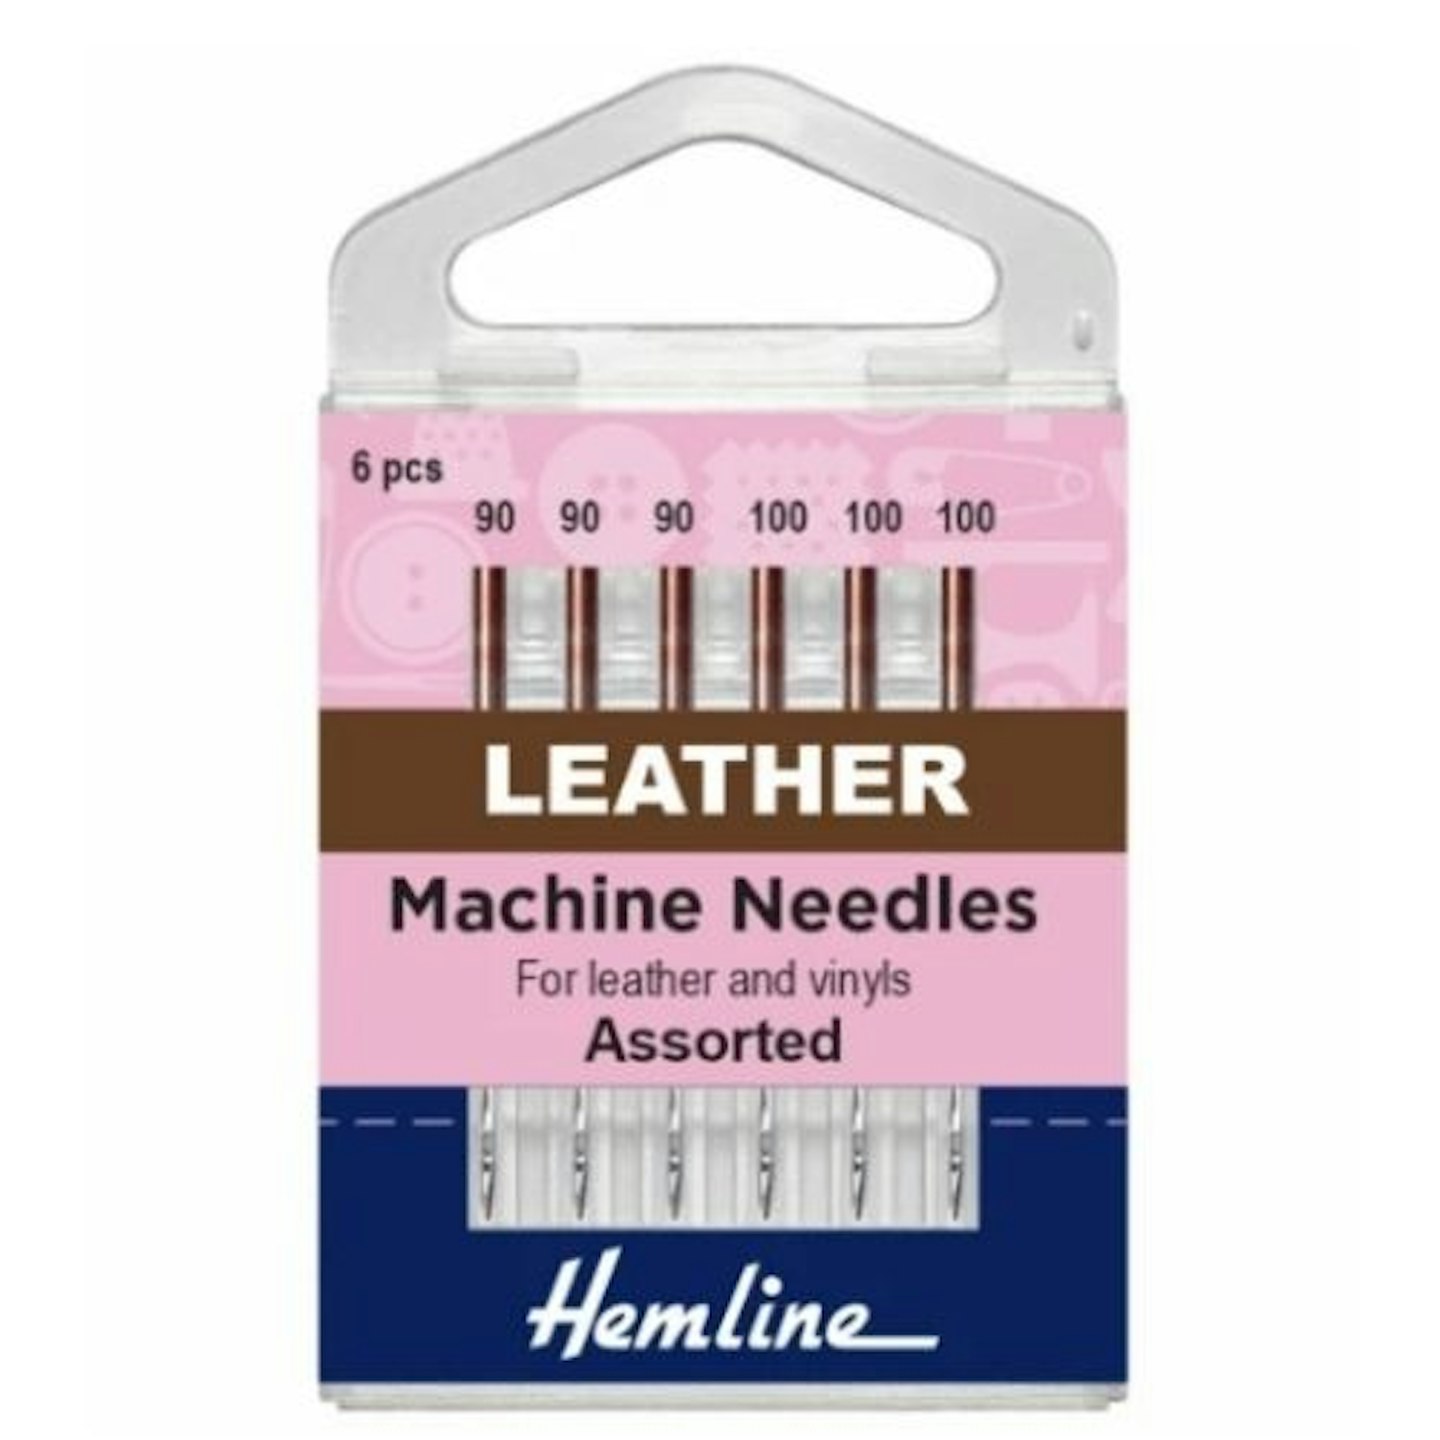 Leather Sewing Machine Needles - Assorted 6 Pack